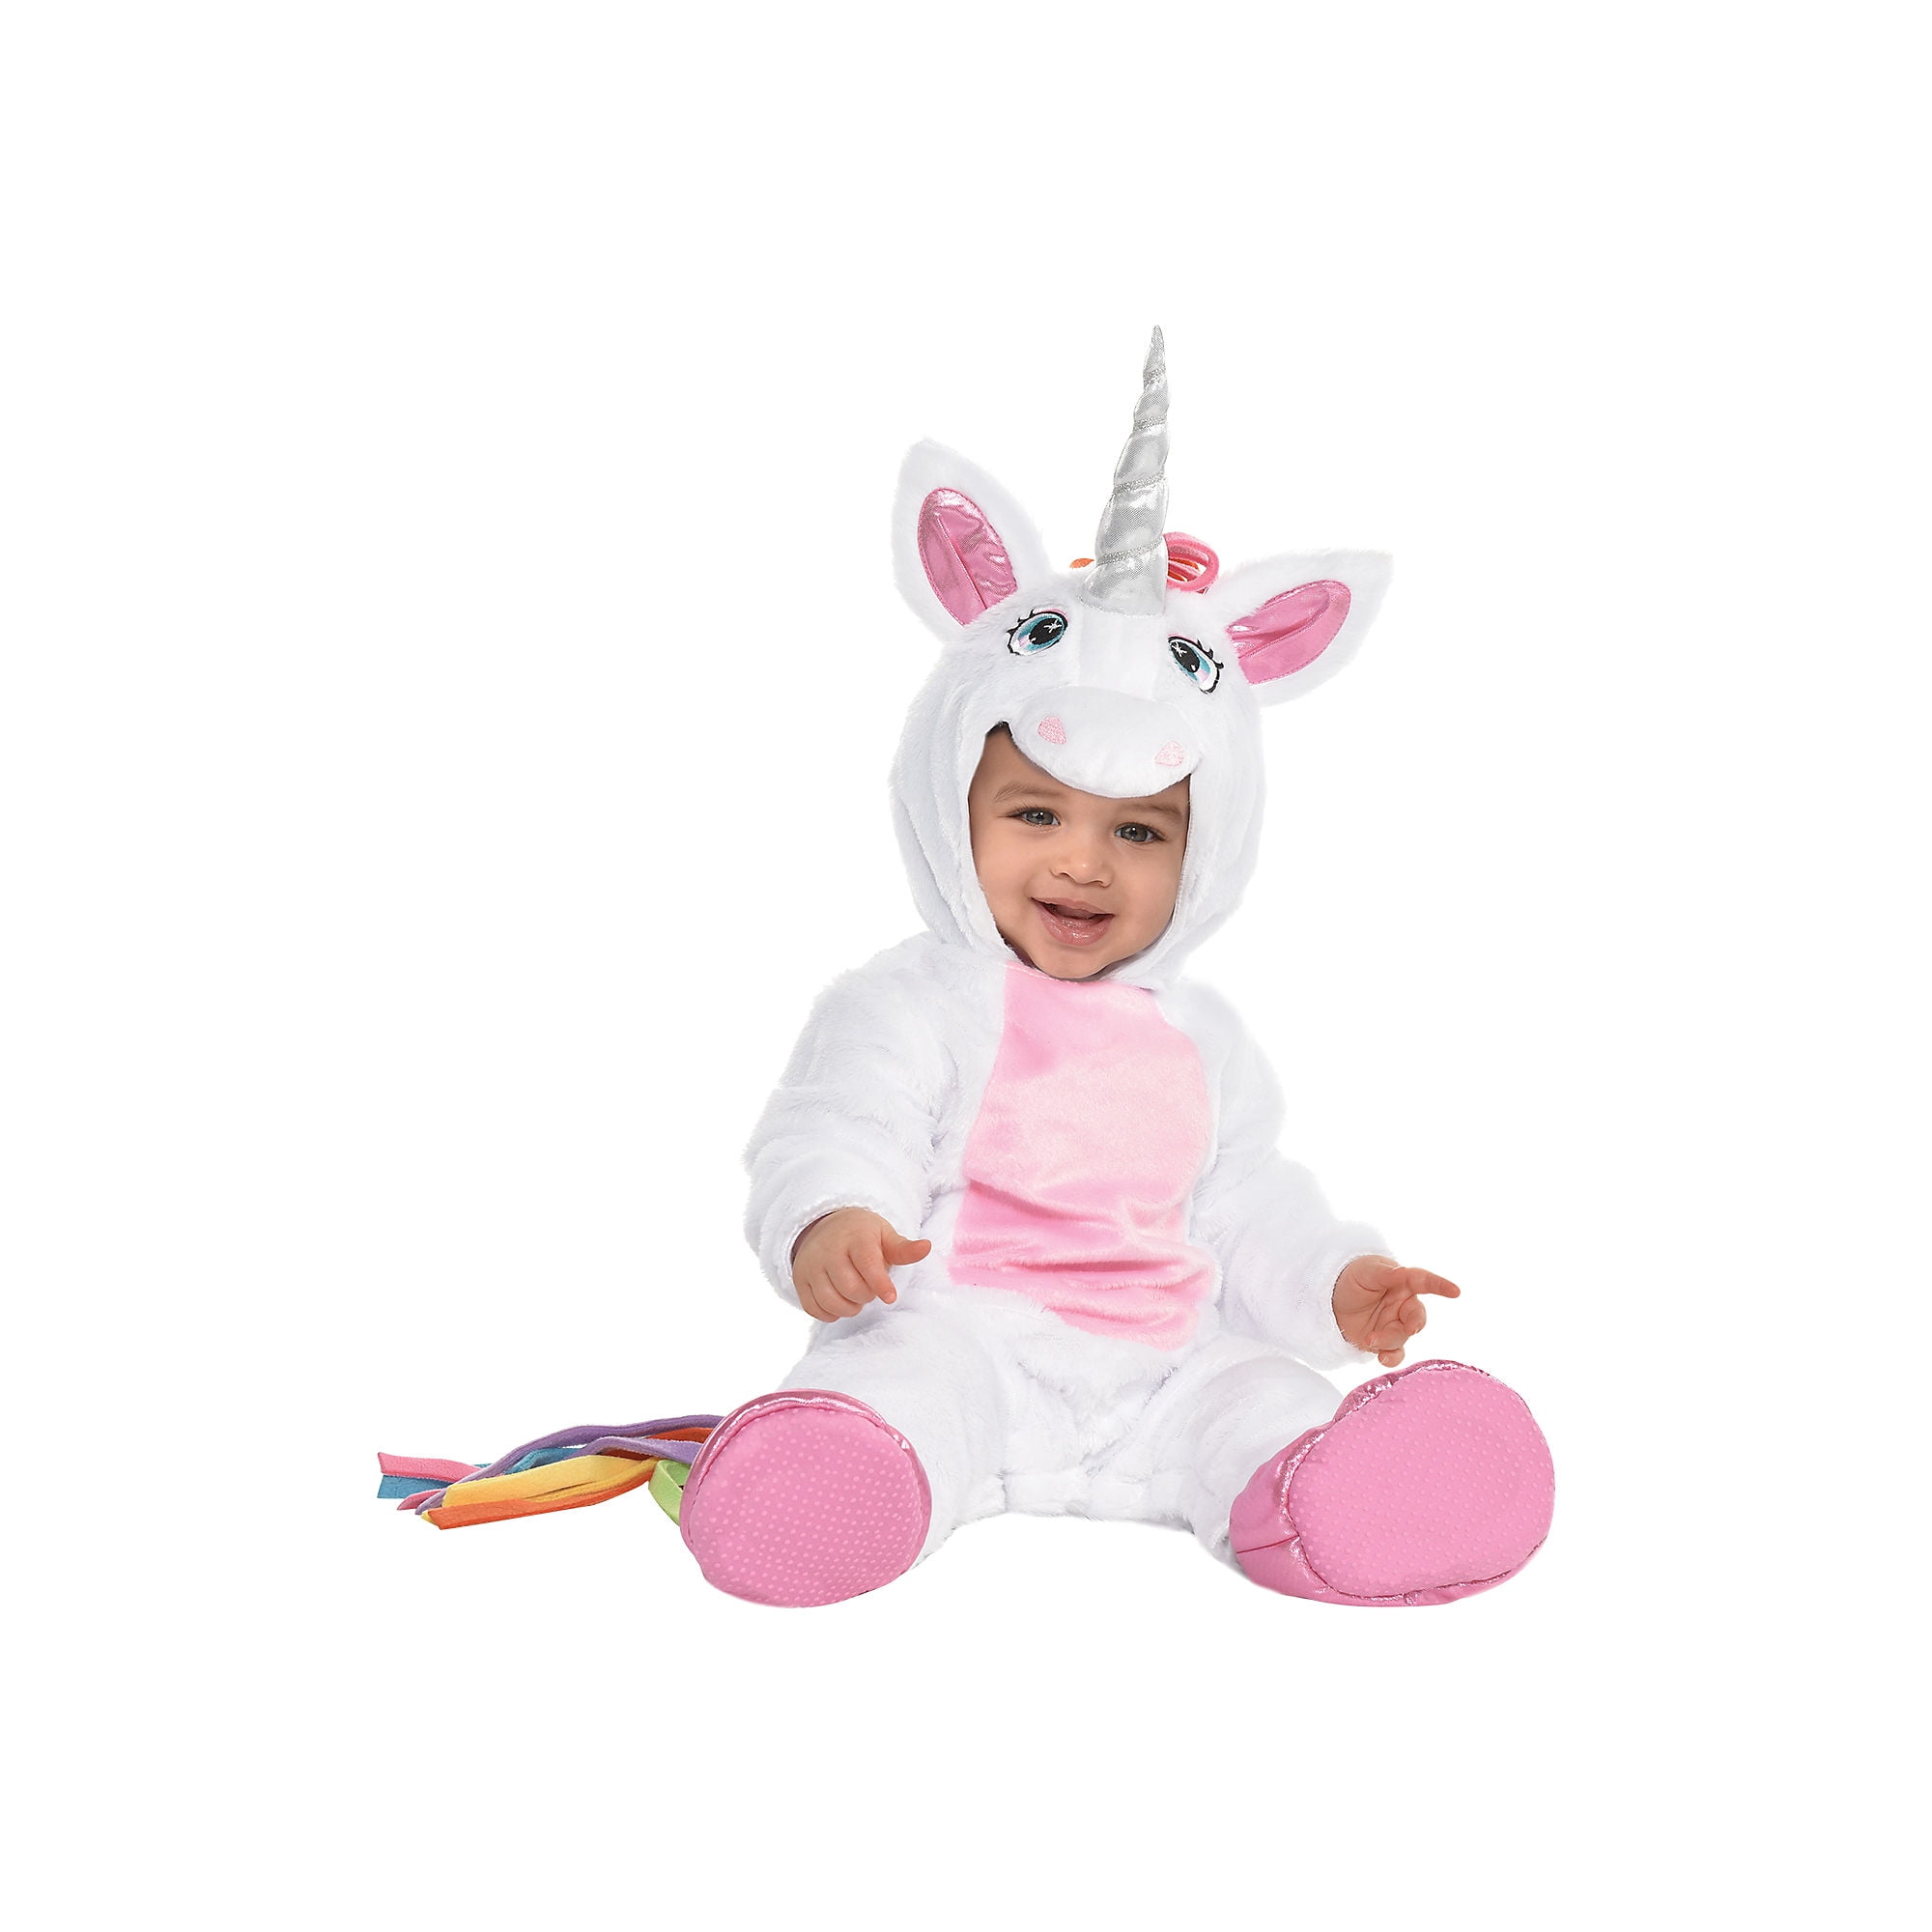 Amscan Unicorn Halloween Costume for Babies, 6-12 Months, Includes ...